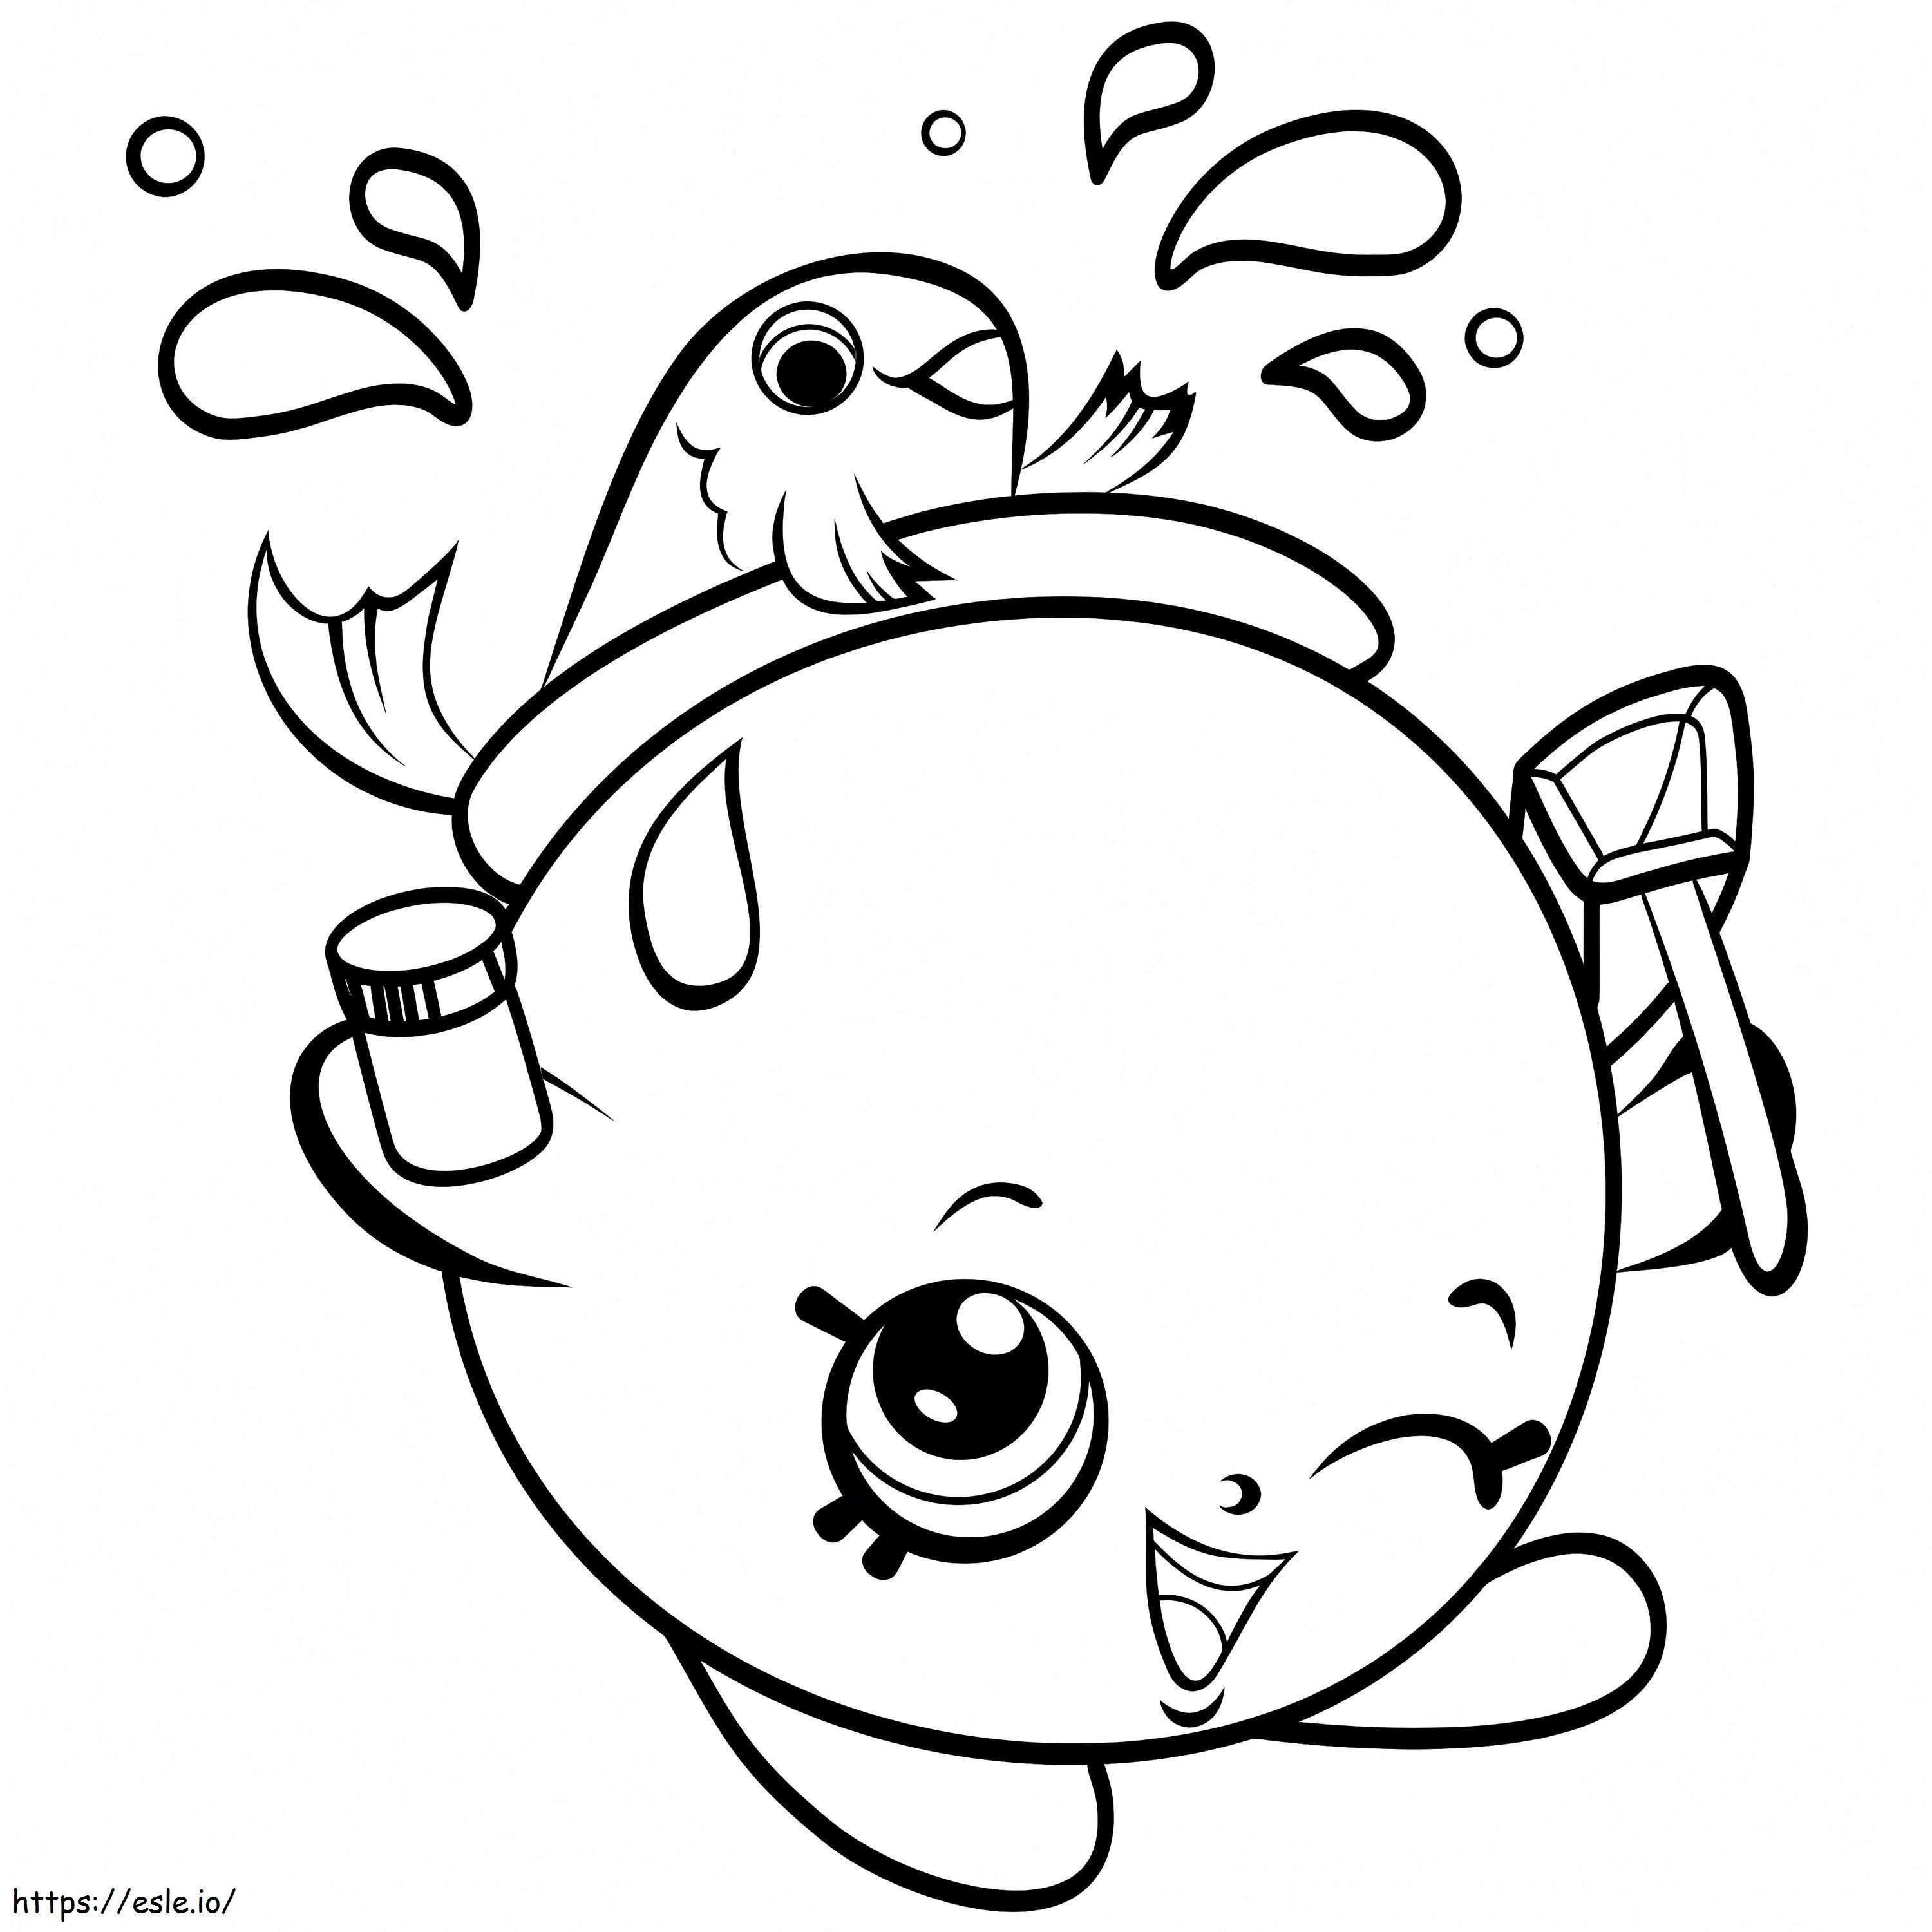 Goldie Fishbowl Shopkin coloring page